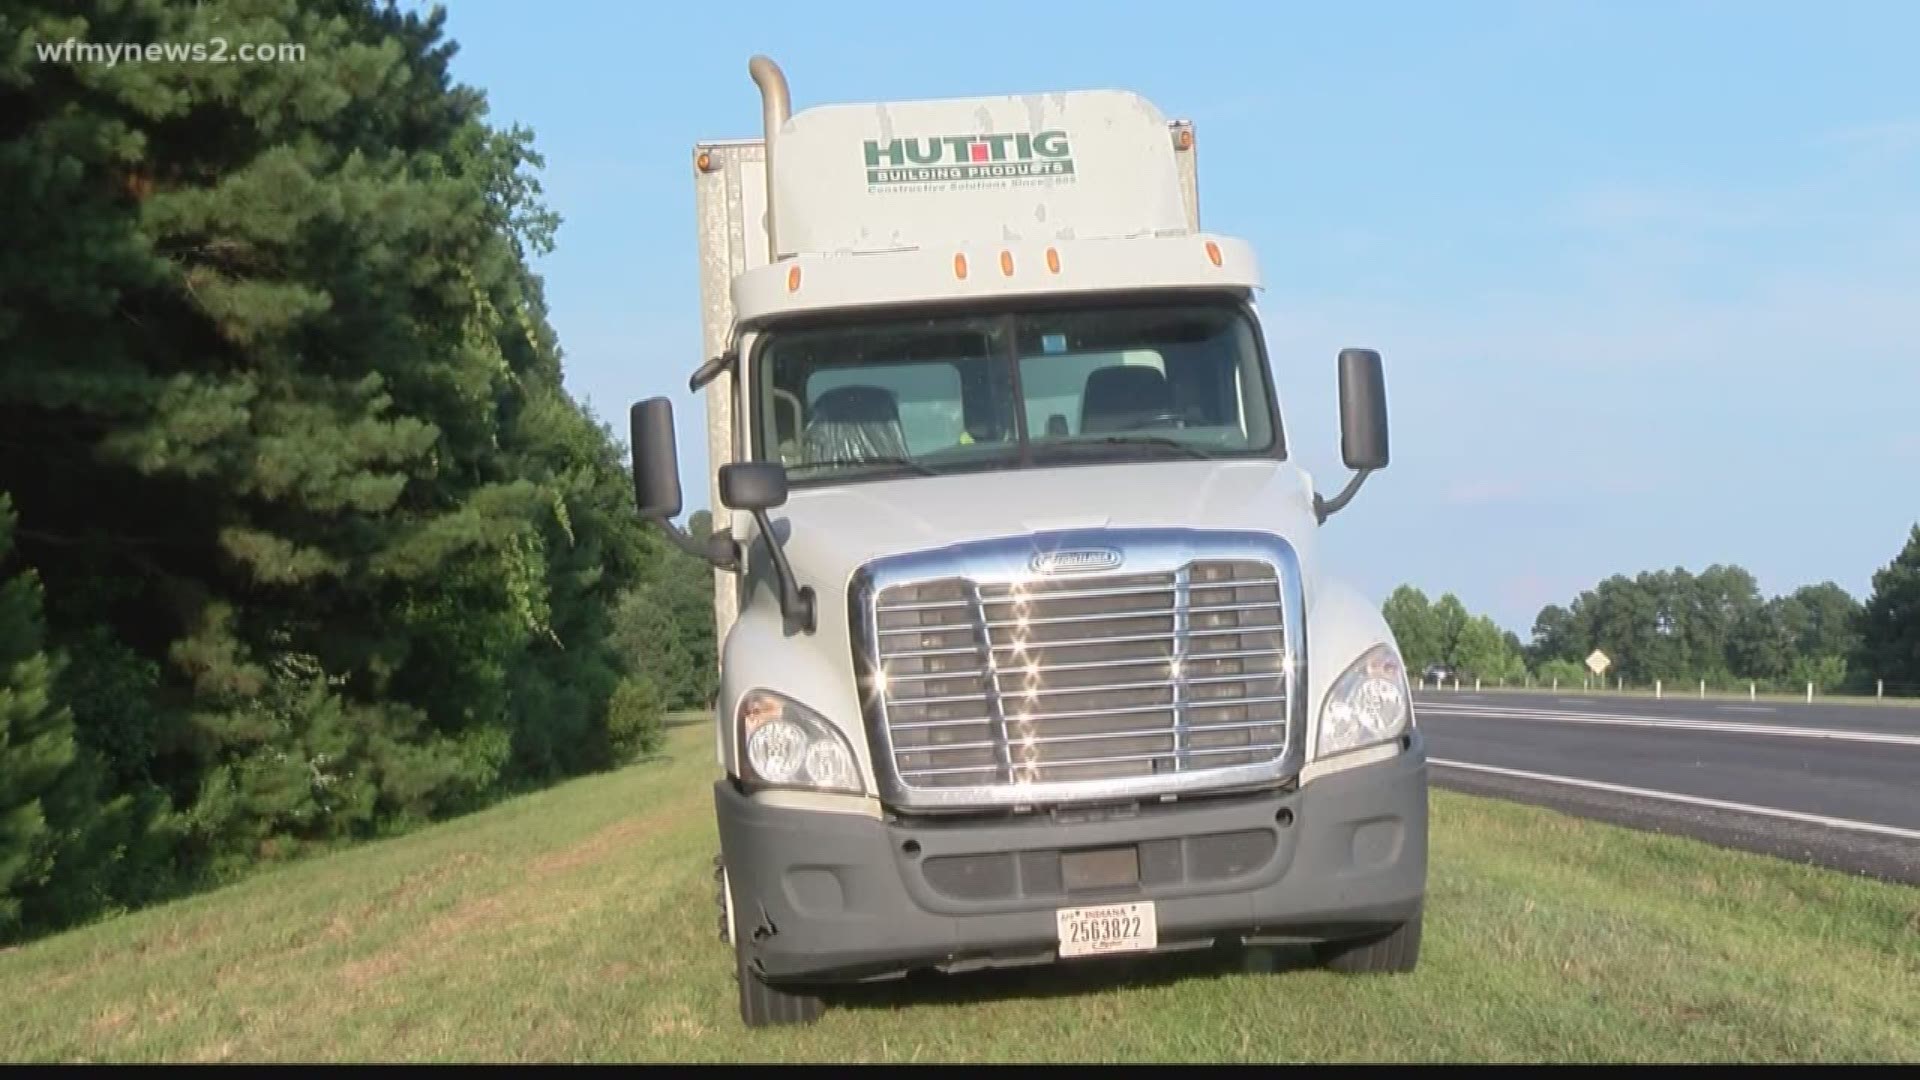 The Johnston County Sheriff's Office said a tractor trailer driver was shot on I-40 West near NC 96. The 59-year-old driver called 911 around 3:22 p.m. Friday. He was able to pull his tractor trailer over safely.